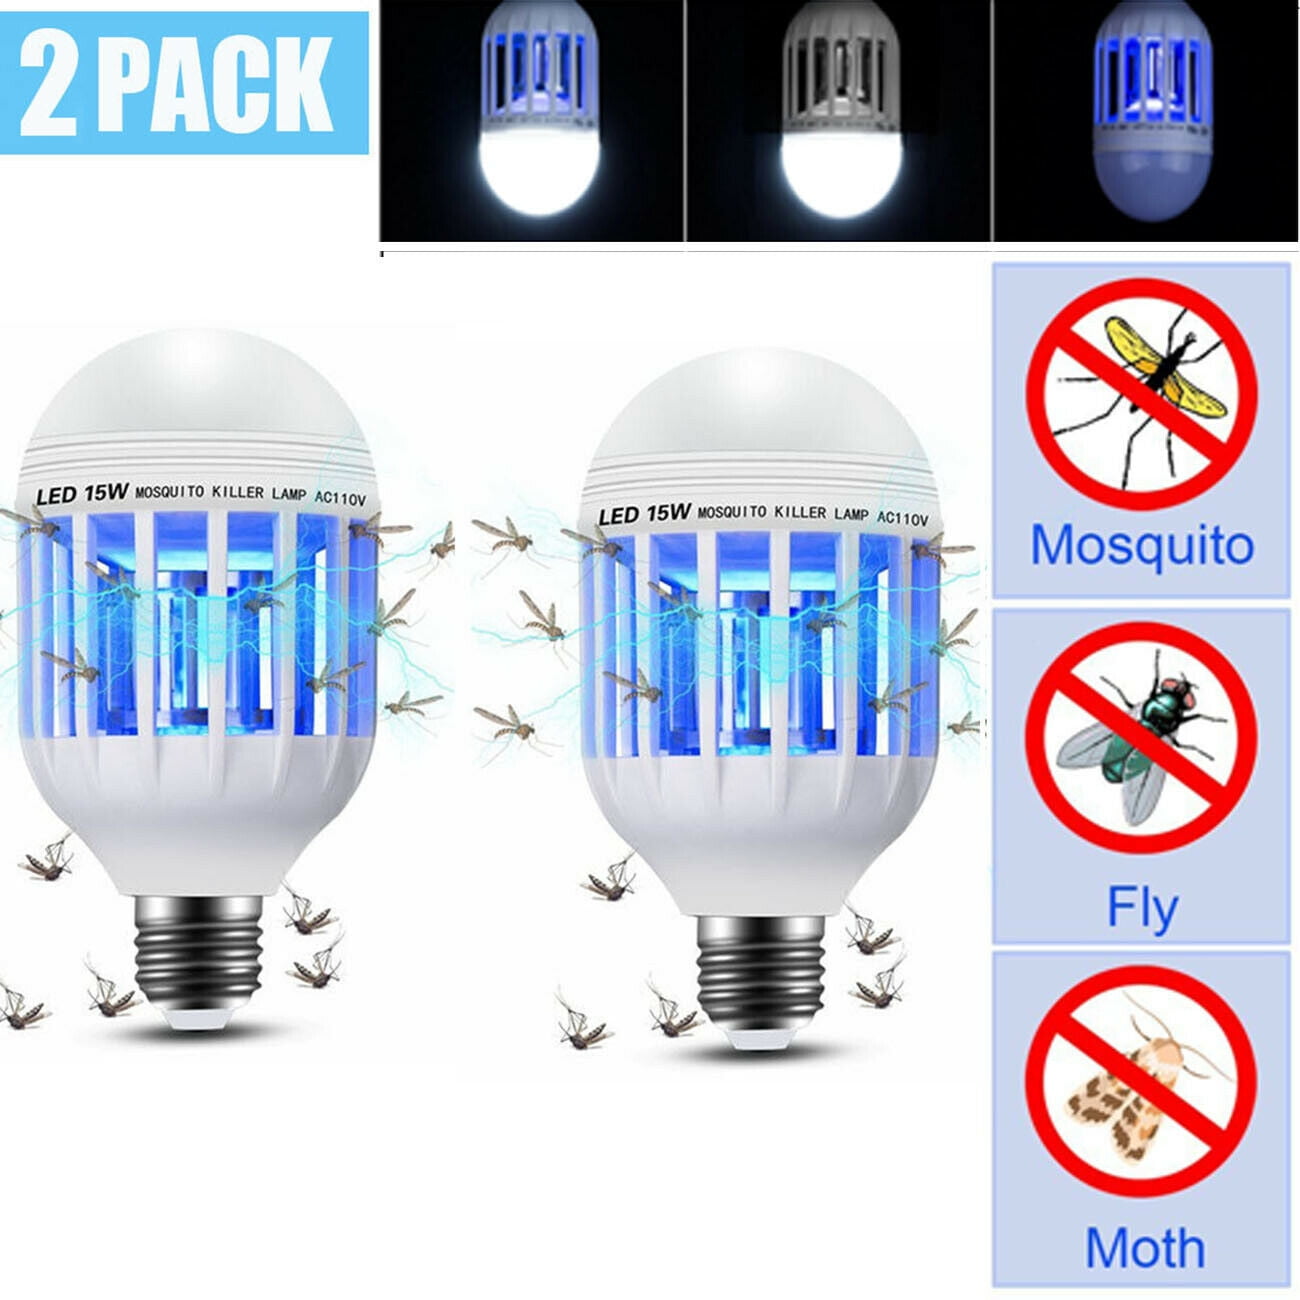 2 x Genuine ZAPPLIGHT Light Zapper Dual LED Light bulb and Bug MOSQUITO 